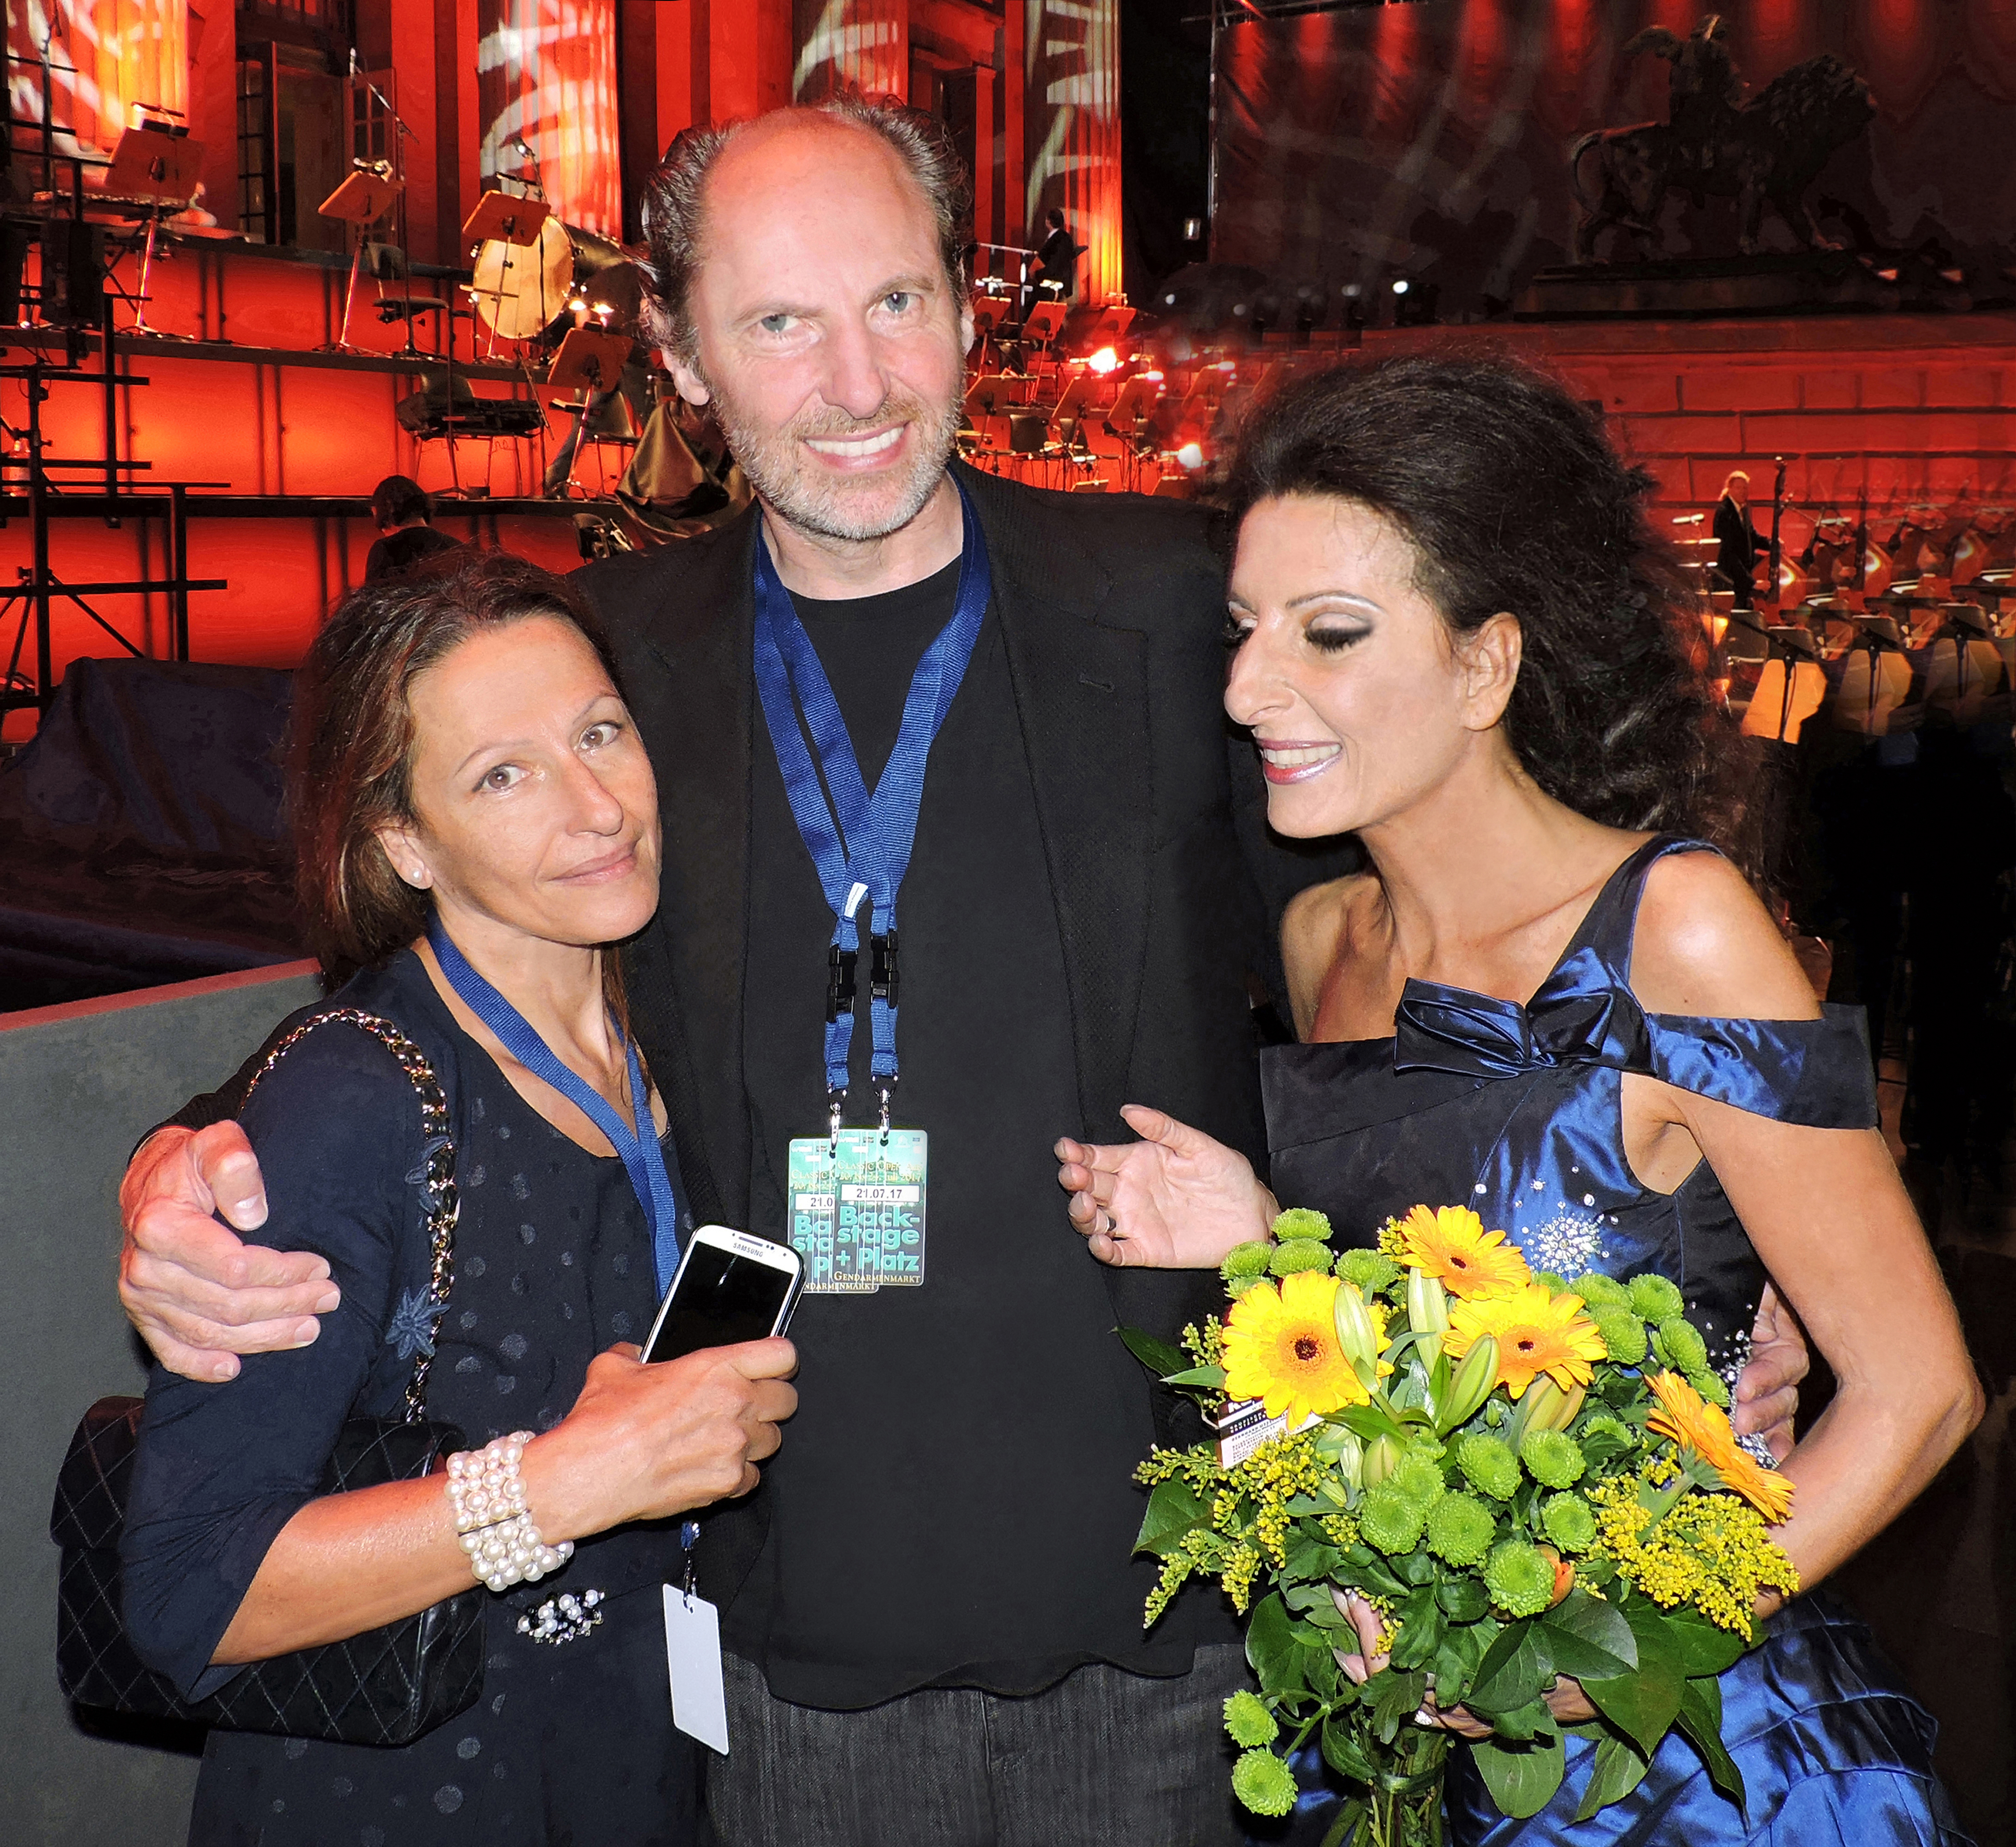 Lucia Aliberti with her beloved sister”Pinella” and her Manager Stefan Schmerbeck⚘Special Concert⚘Gendarmenmarkt⚘Classic Open Air⚘Berlin⚘Escada Fashion⚘On Stage⚘:http://www.luciaaliberti.it #luciaaliberti #pinellaaliberti #stefanschmerbeck #gendarmenmarkt #classicopenair #berlin #concert #onstage #escadafashion